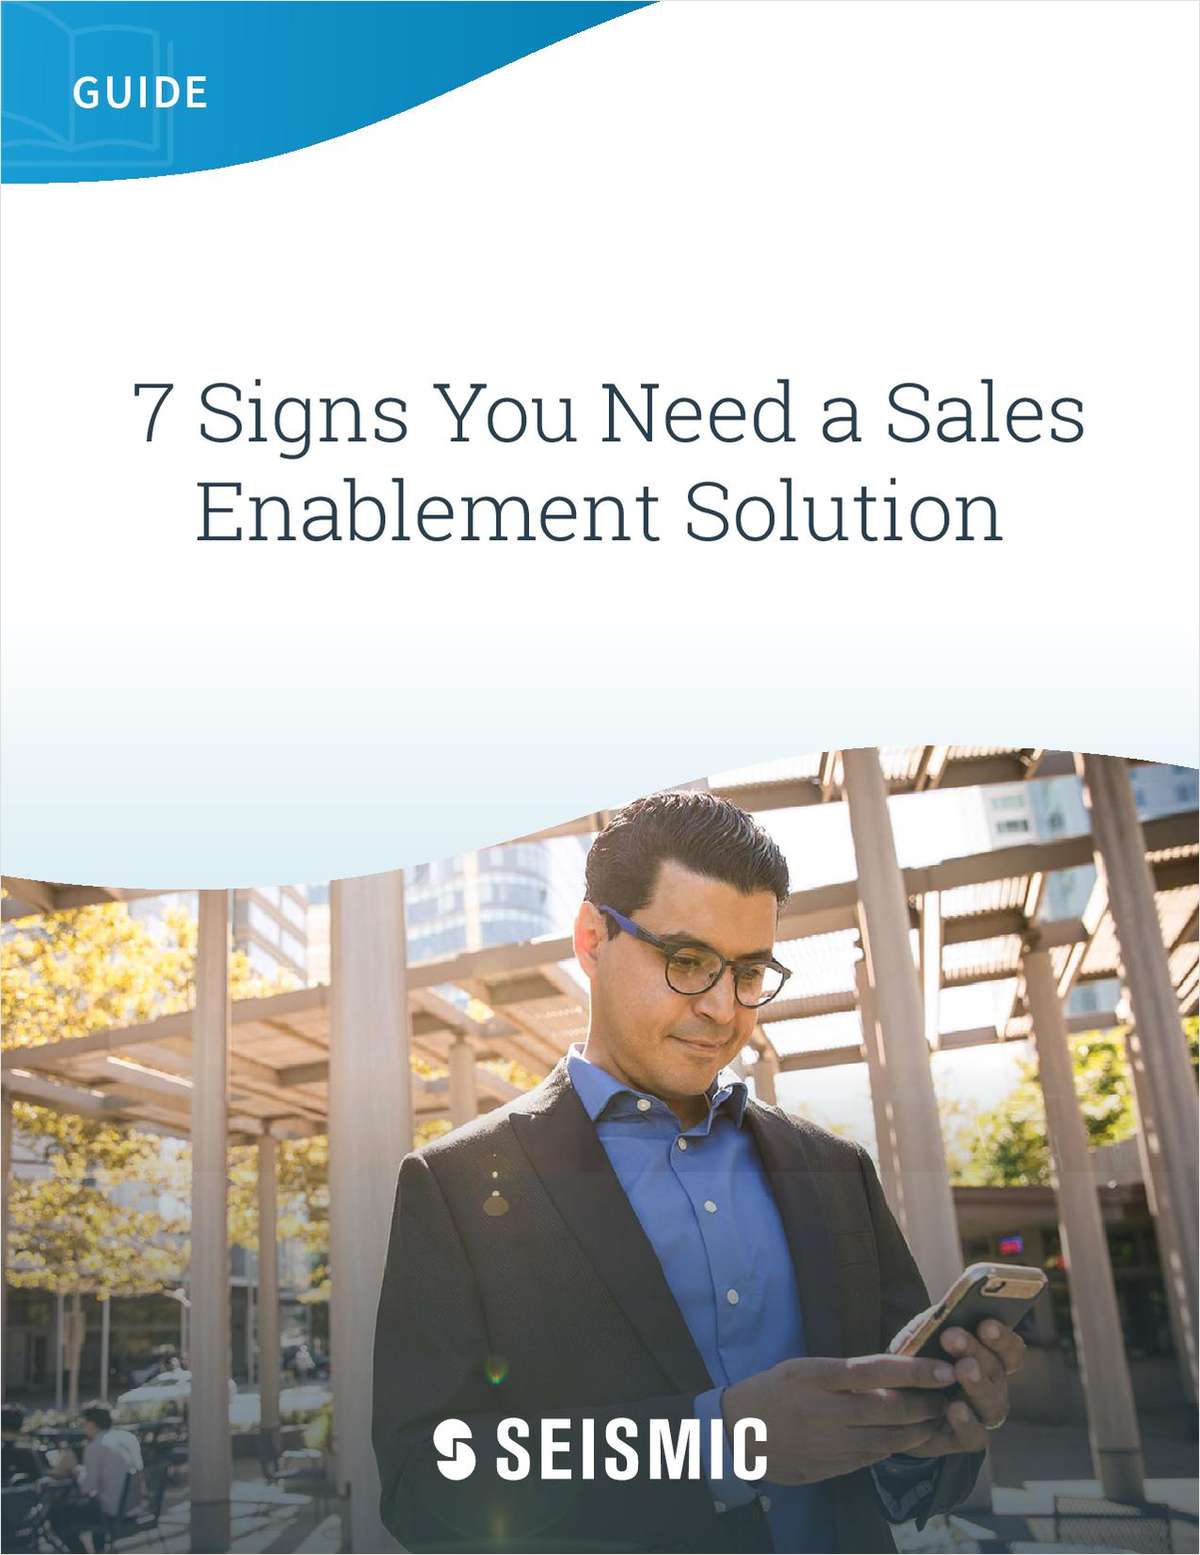 7 Signs You Need a Sales Enablement Solution